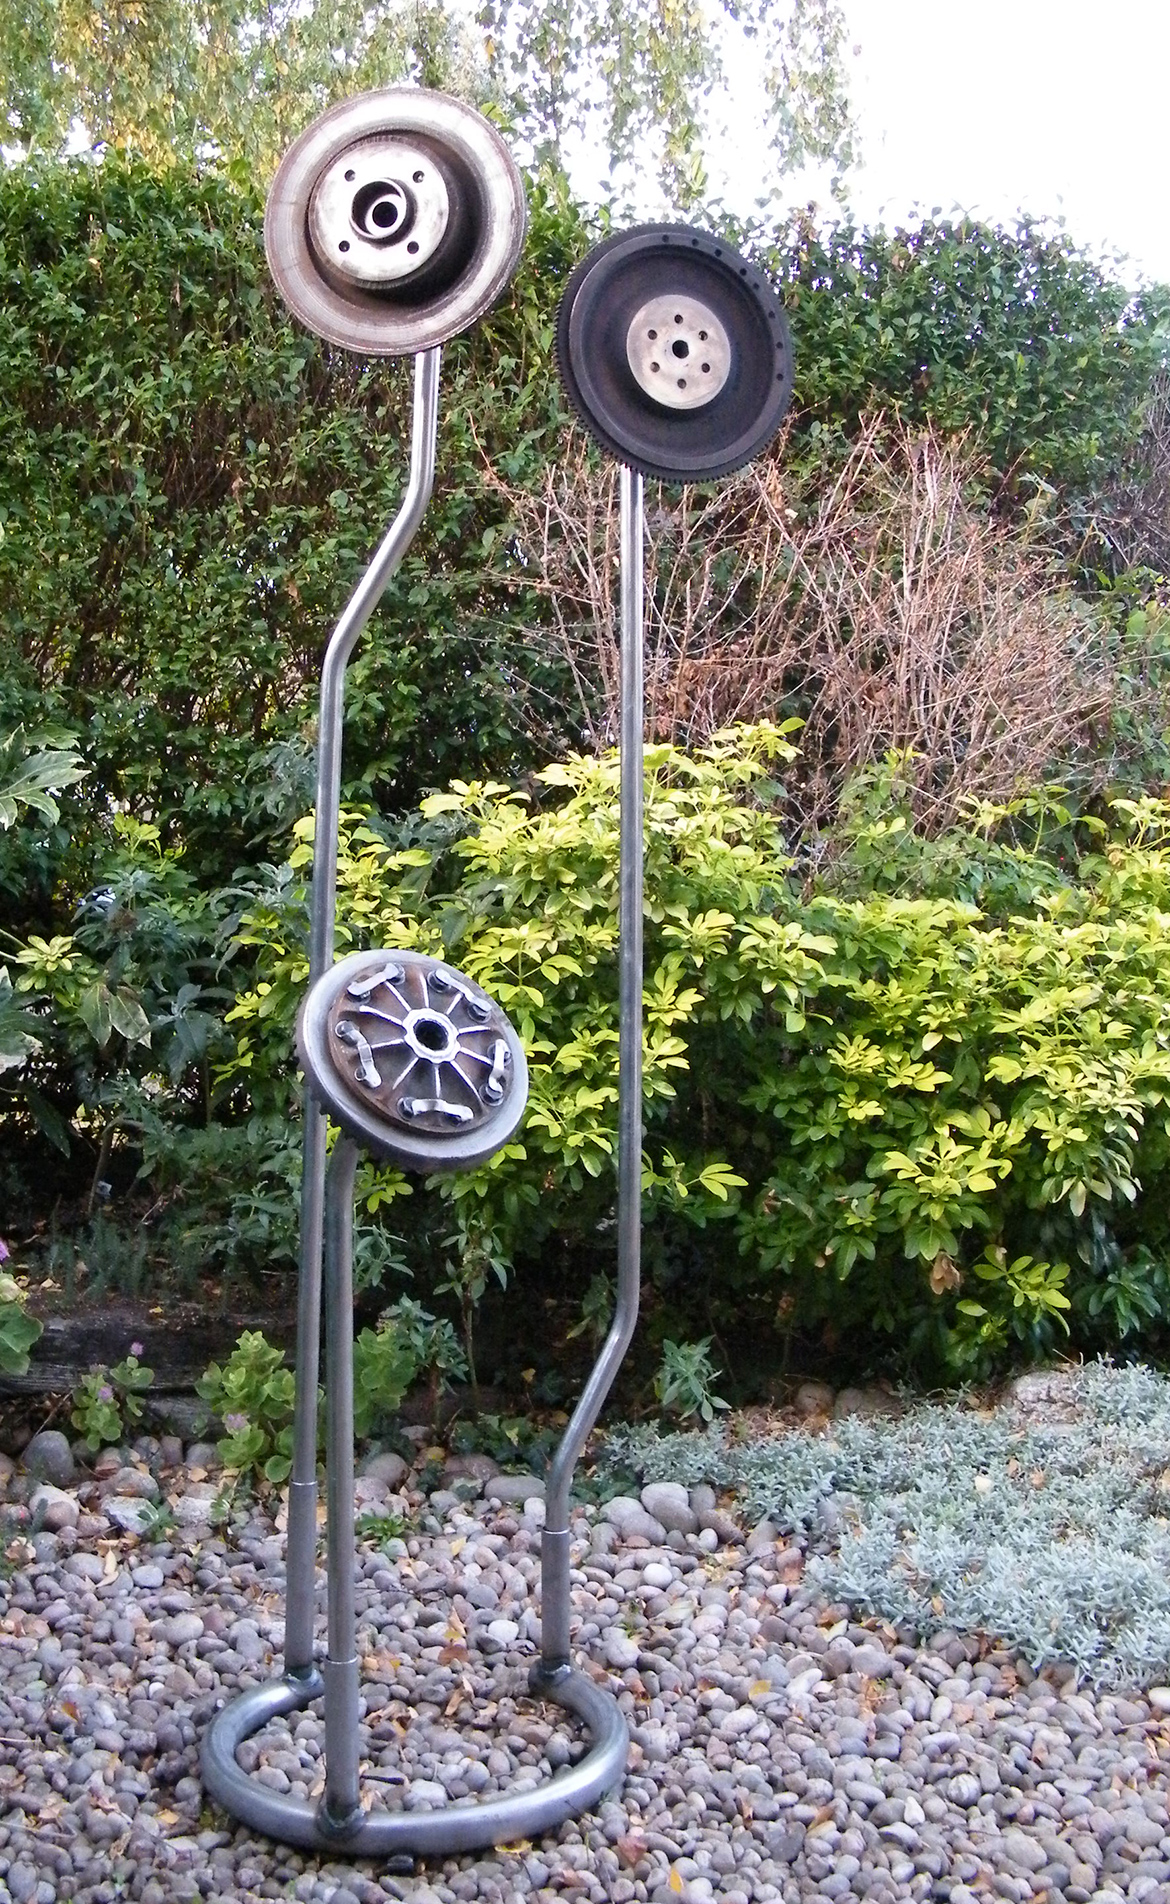 Welded metal sculpture - created from found objects, car parts and metal tubing